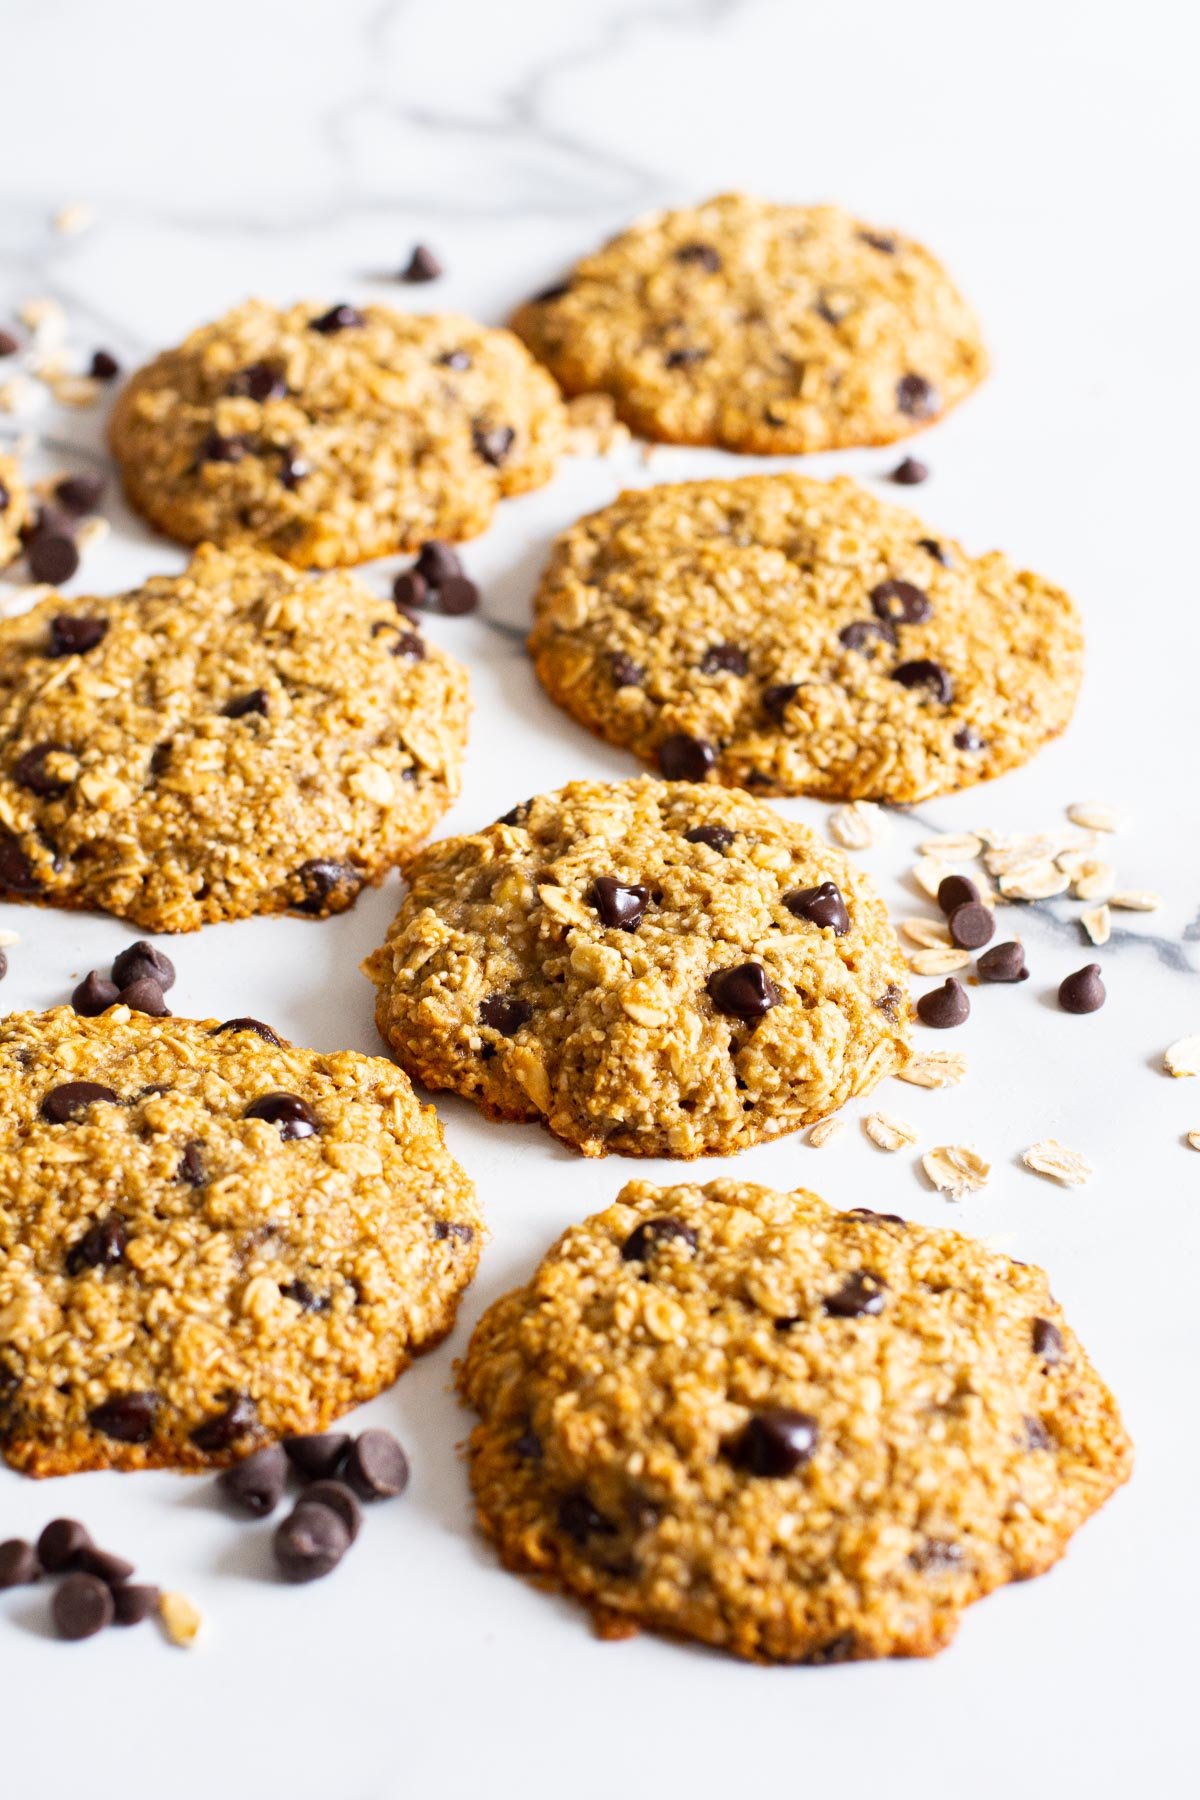 Healthy banana oatmeal cookies with chocolate chips and oats on a flat surface.